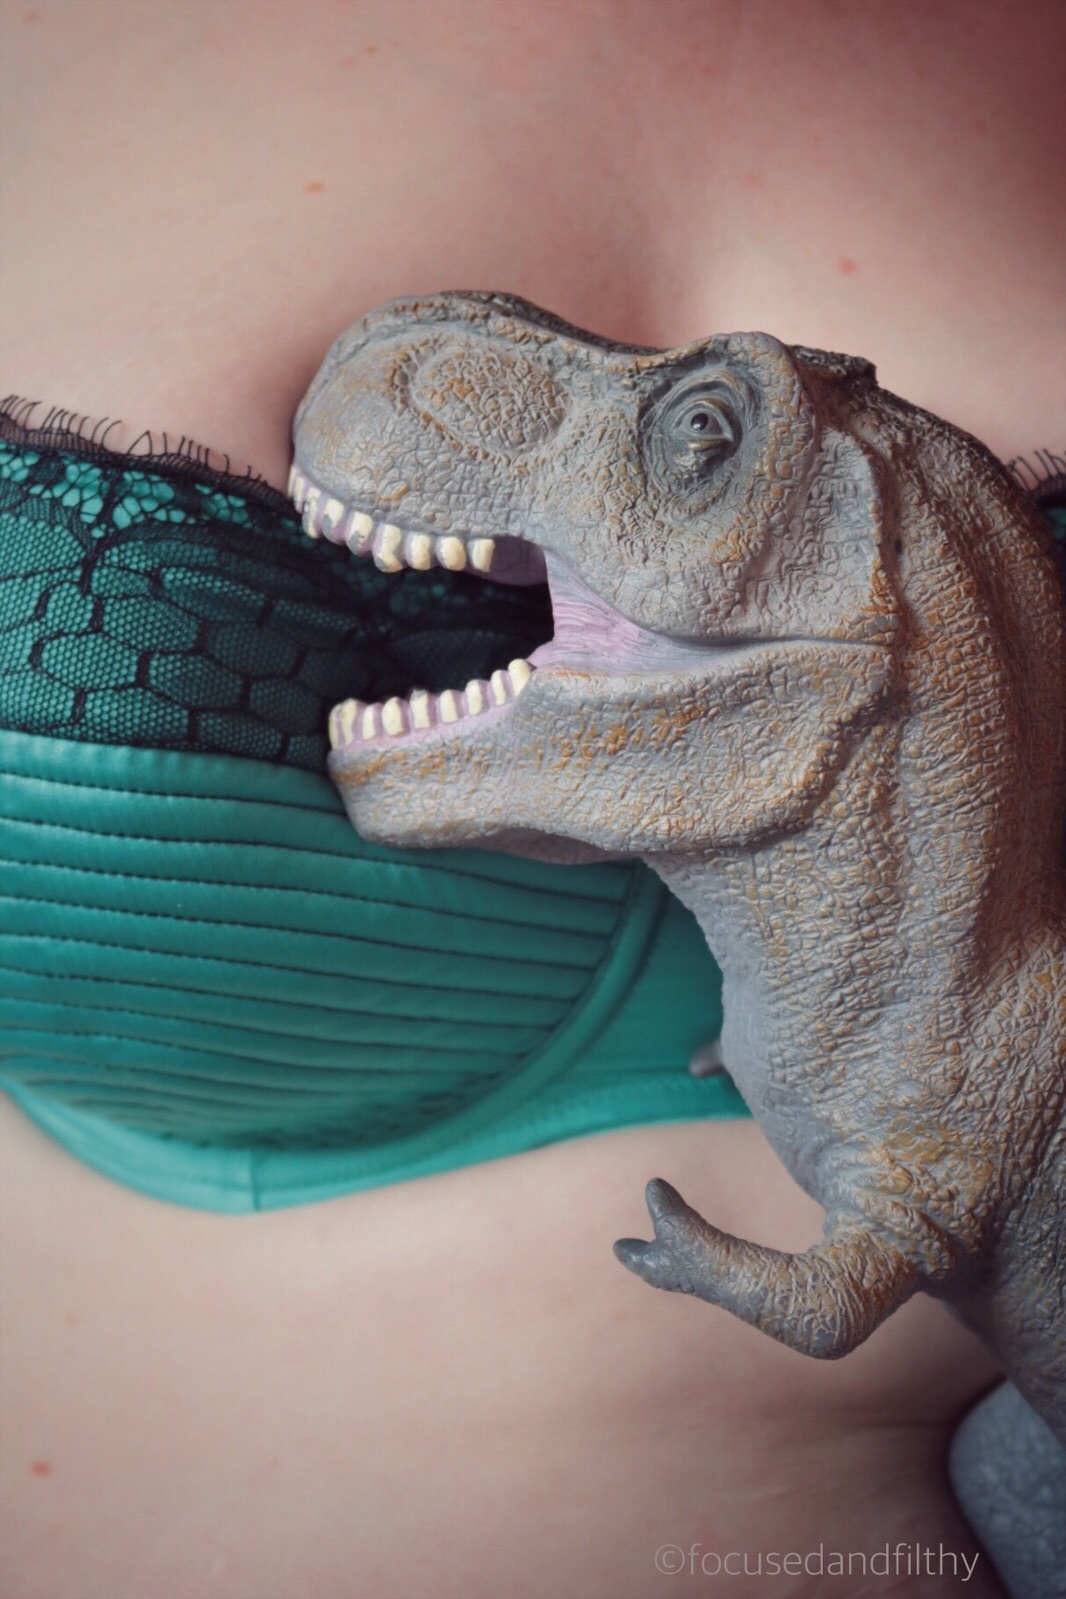 Colour photograph of a T-Rex toy trying to bite at the woman’s top of turquoise bra